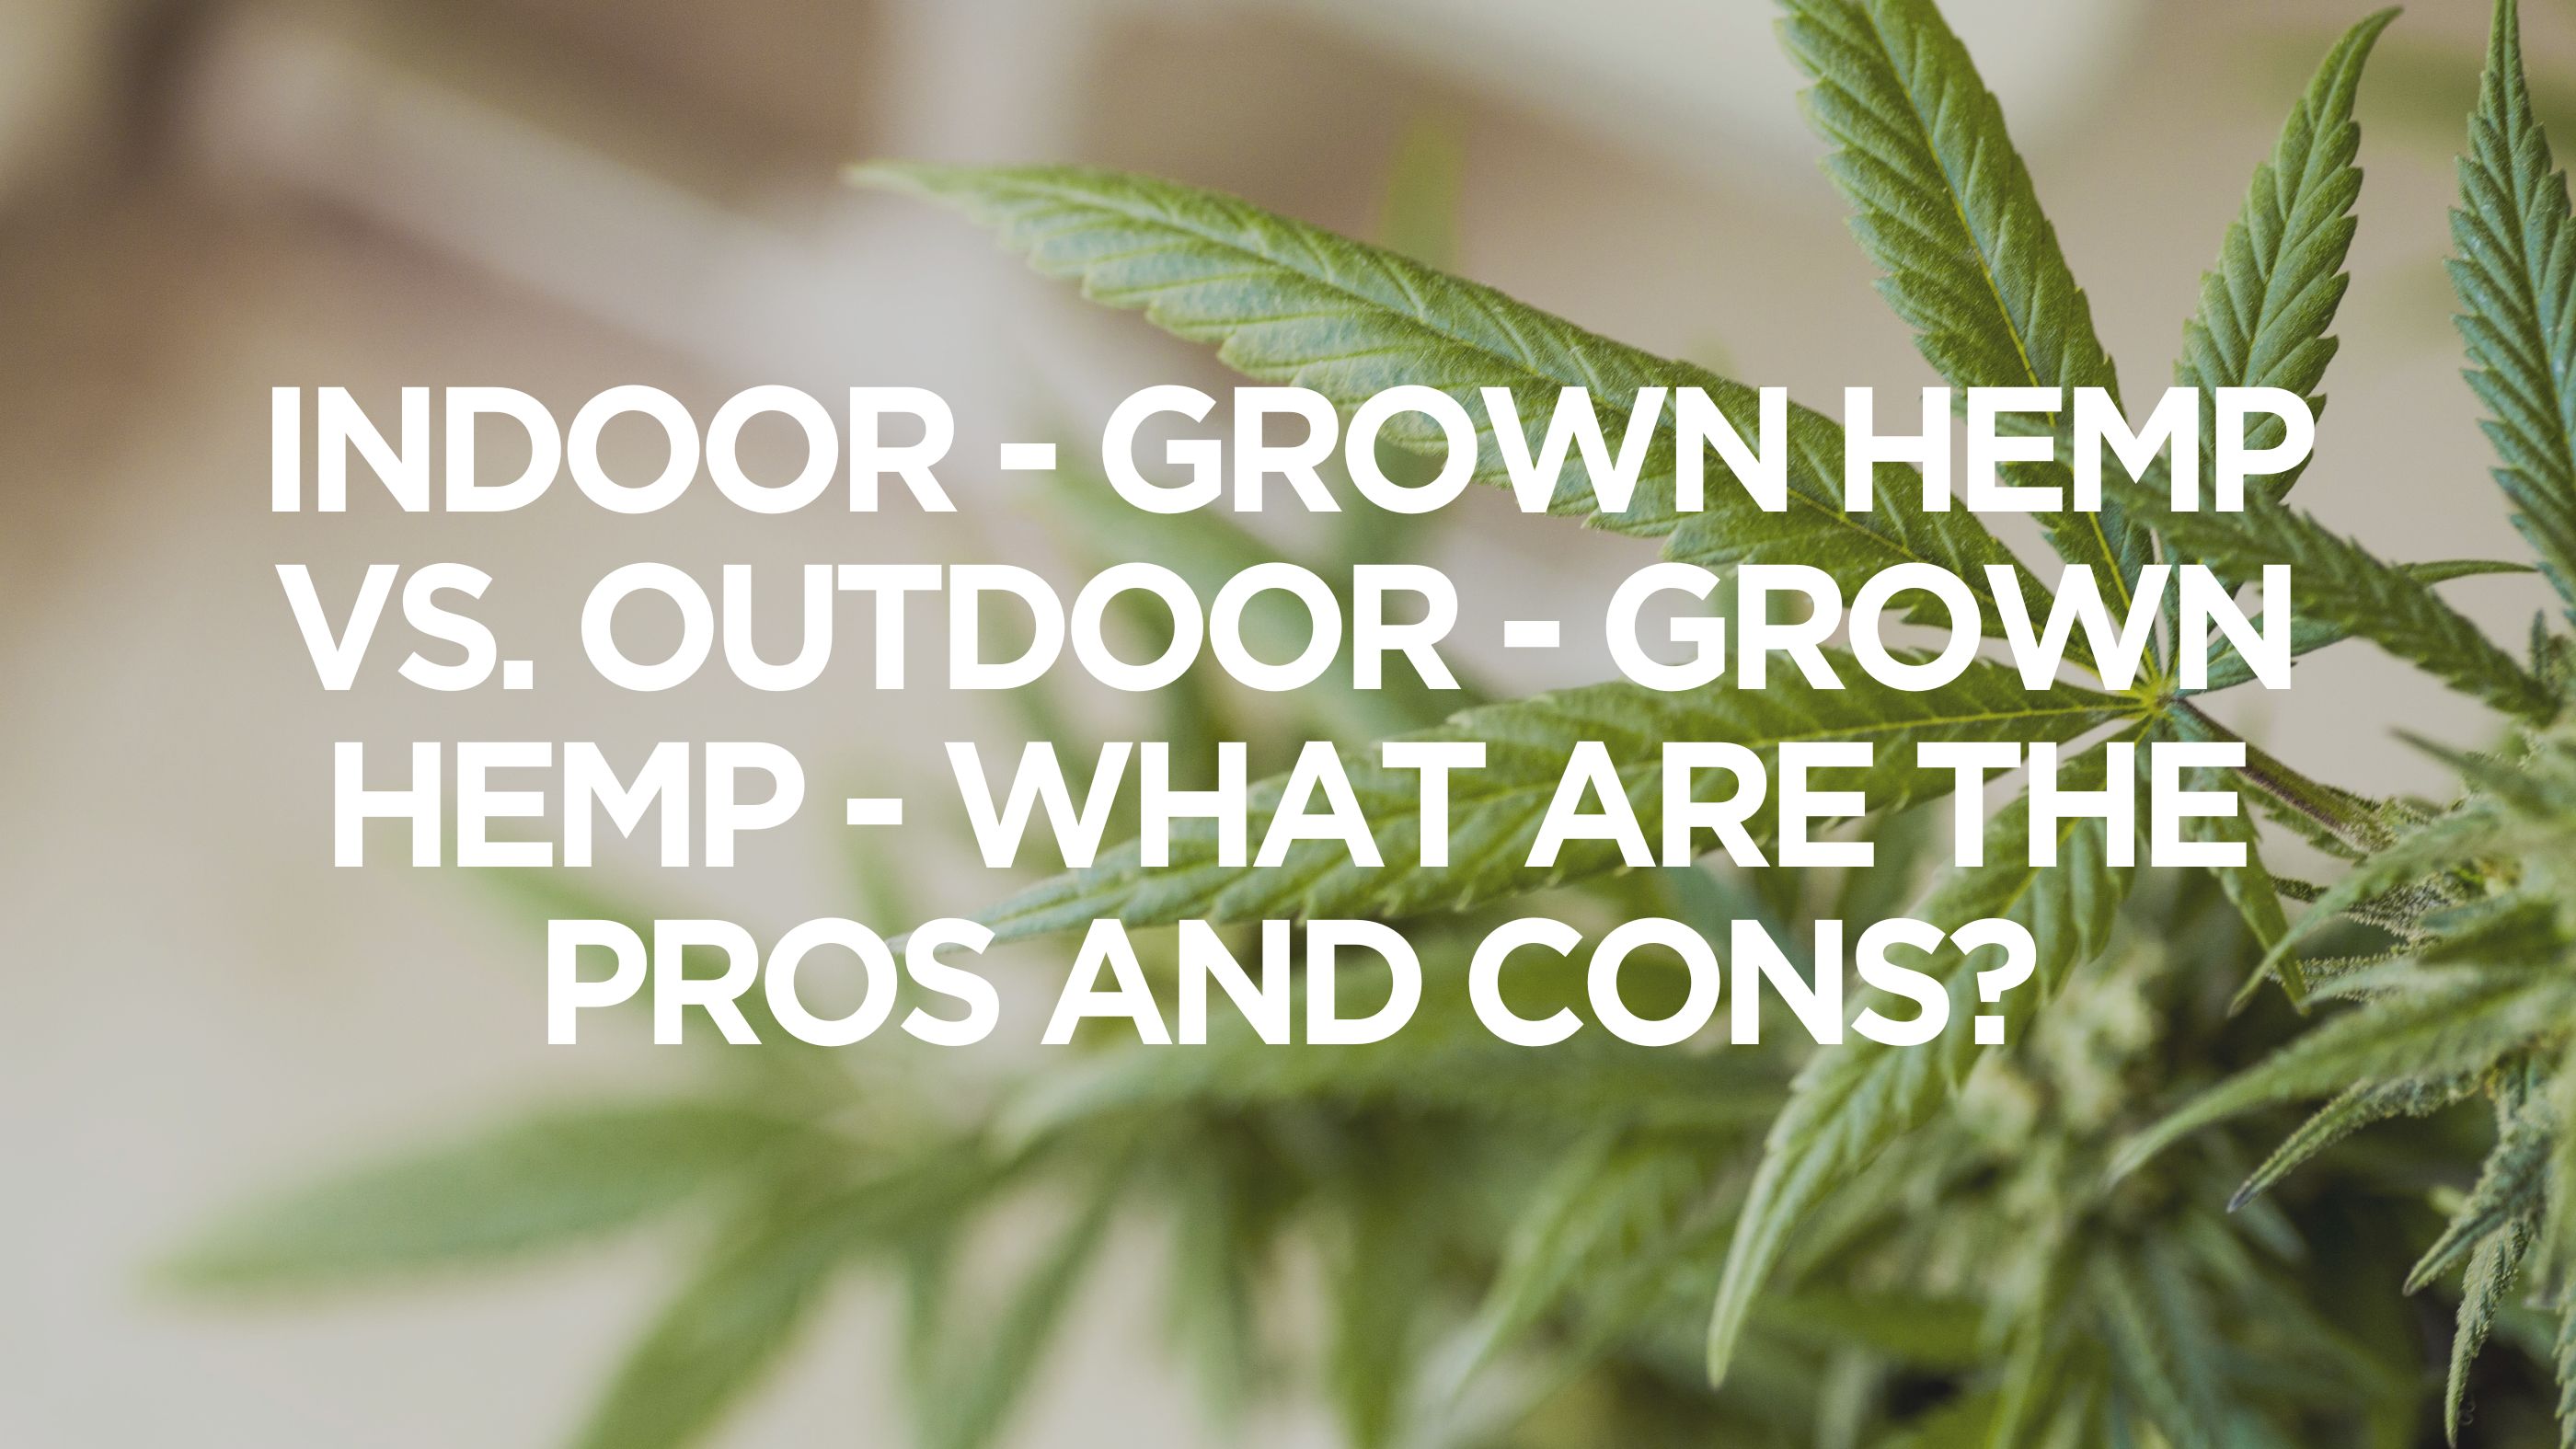 Indoor - Grown Hemp Vs. Outdoor-Grown Hemp - What Are The Pros and Cons?